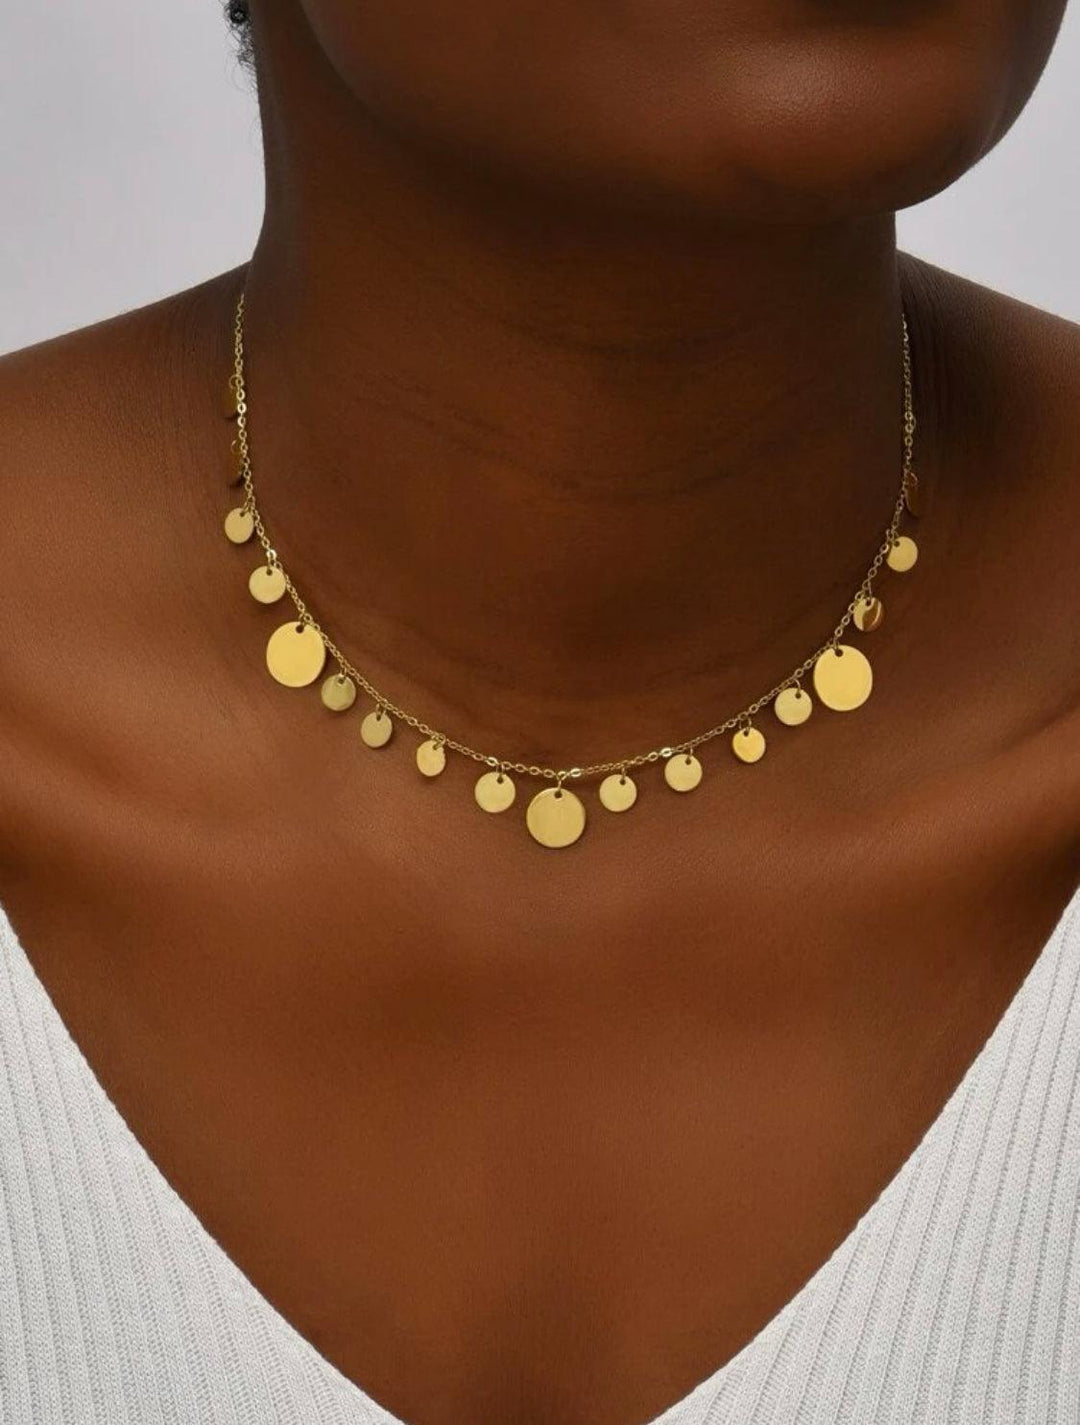 Boho chic necklace in Lagos, Nigeria - All Things Chic